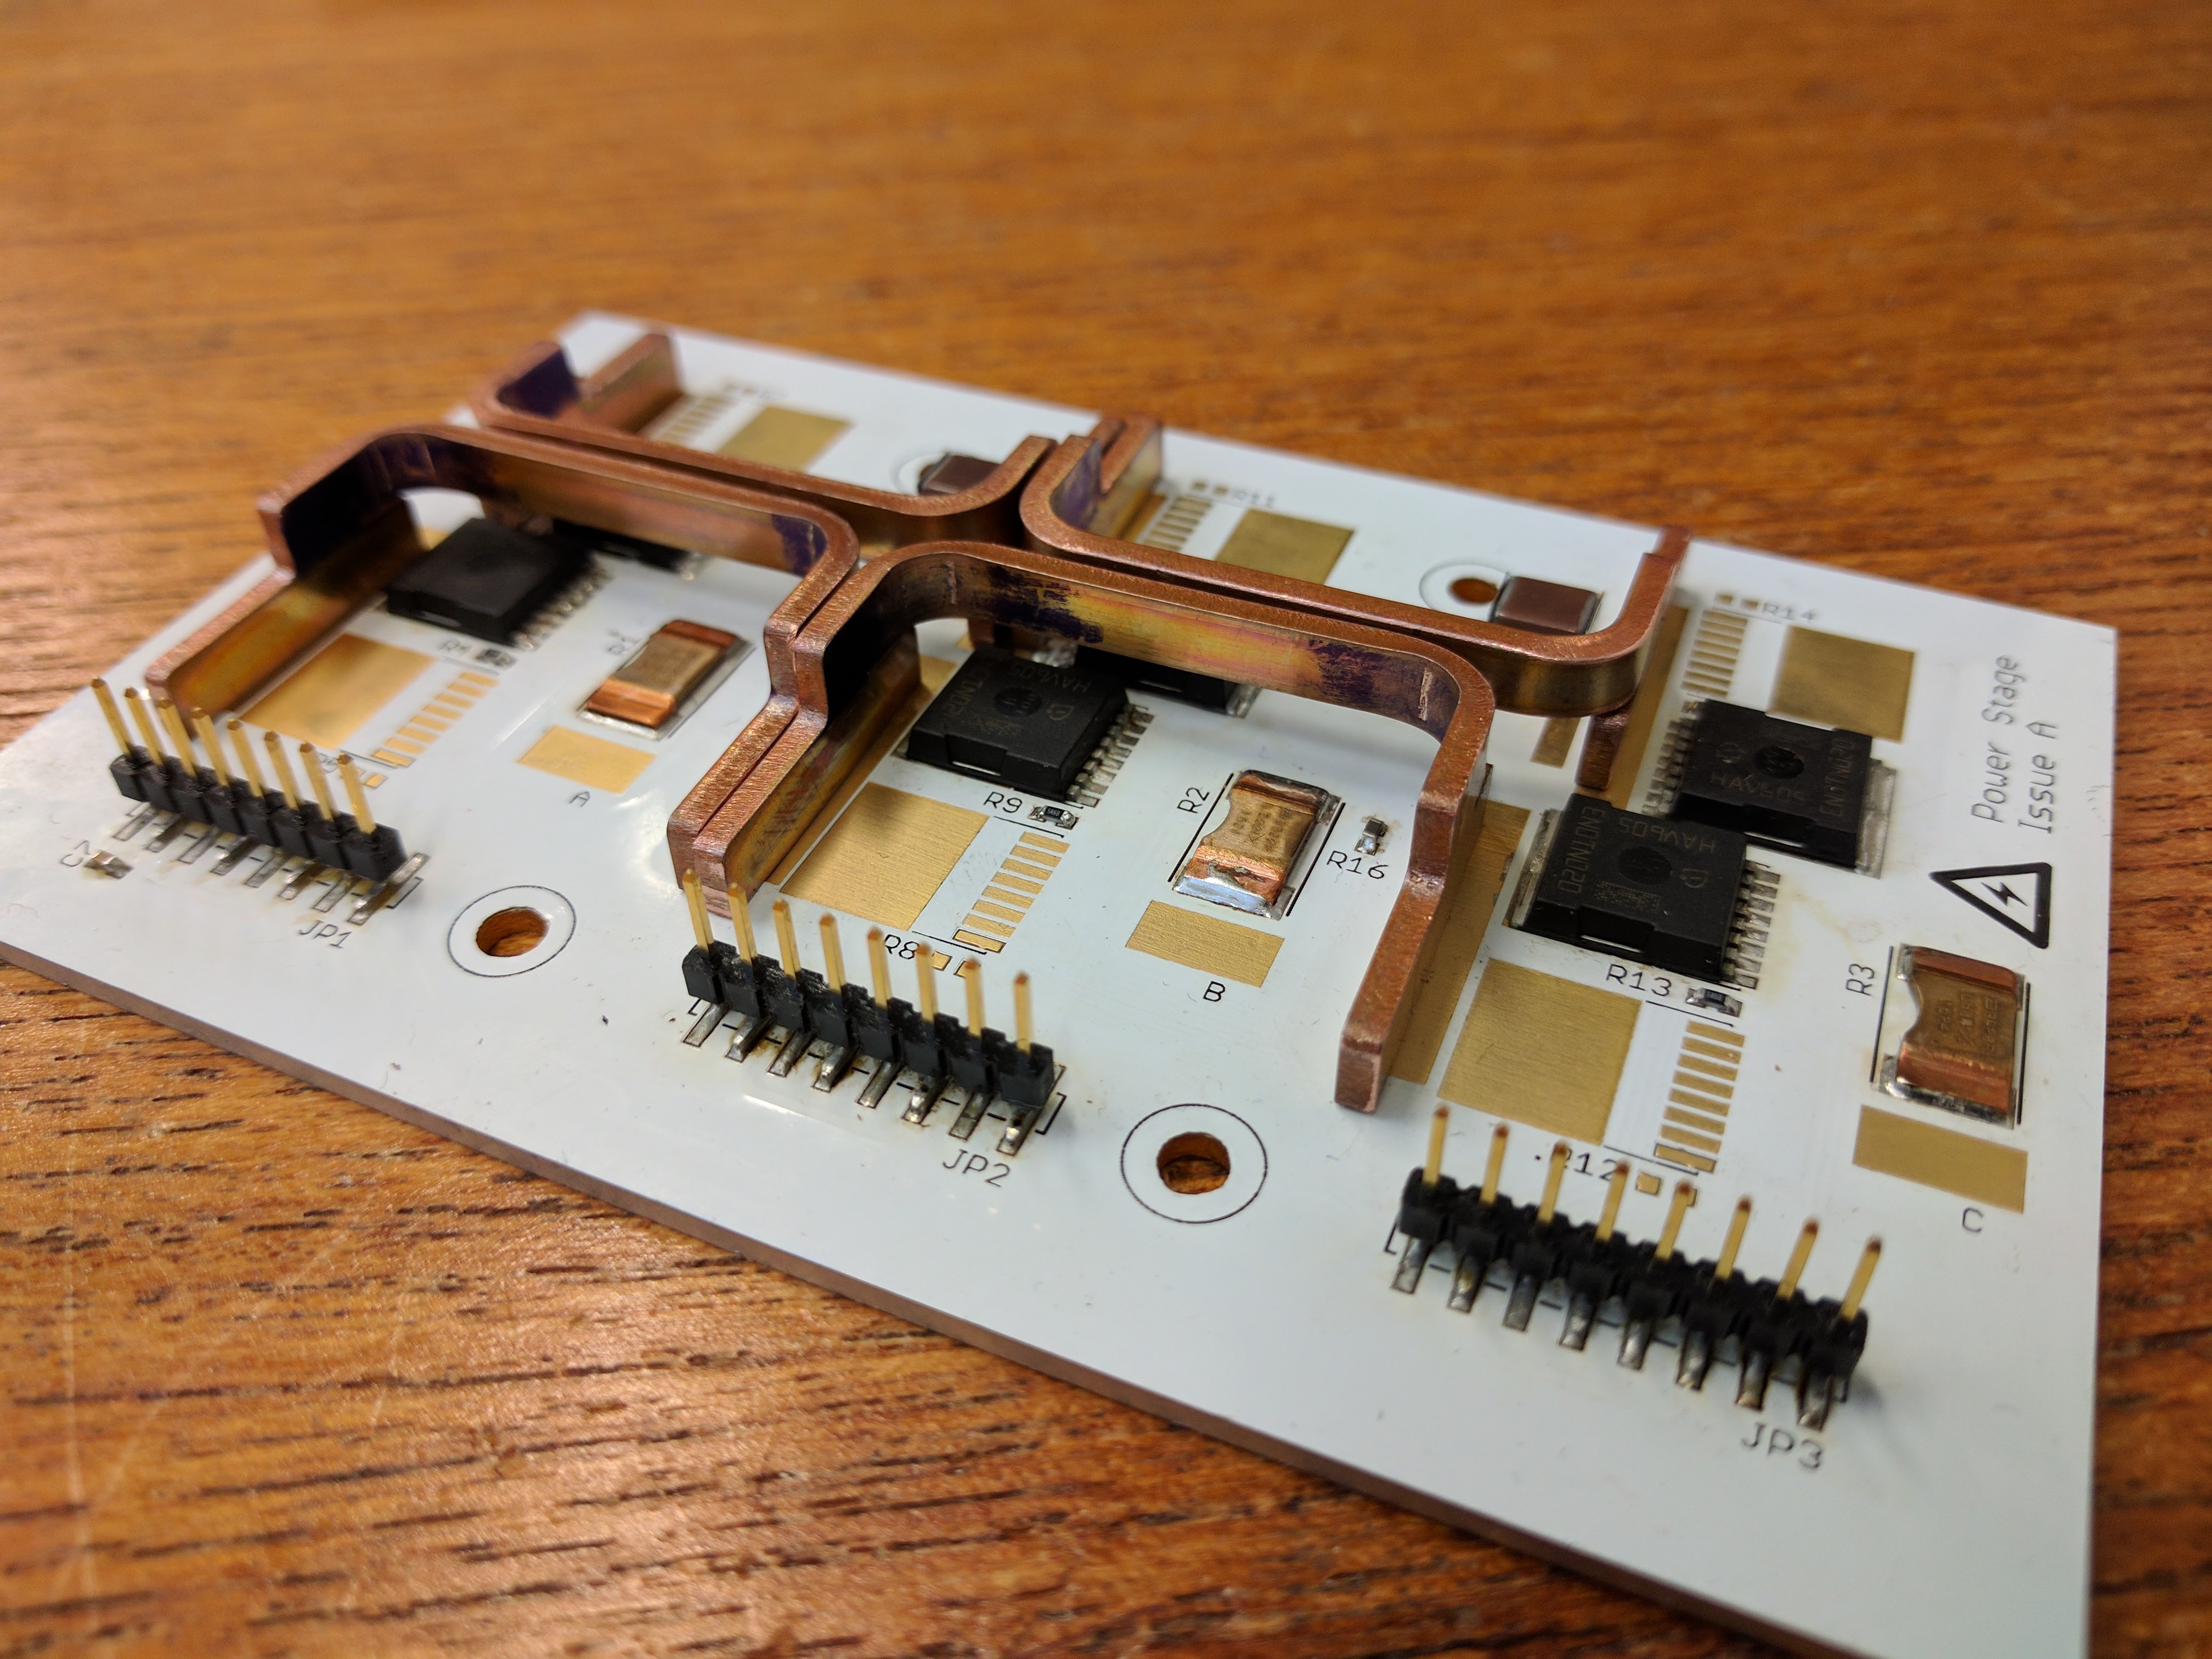 The 12FET Power stage with only half the MOSFETs